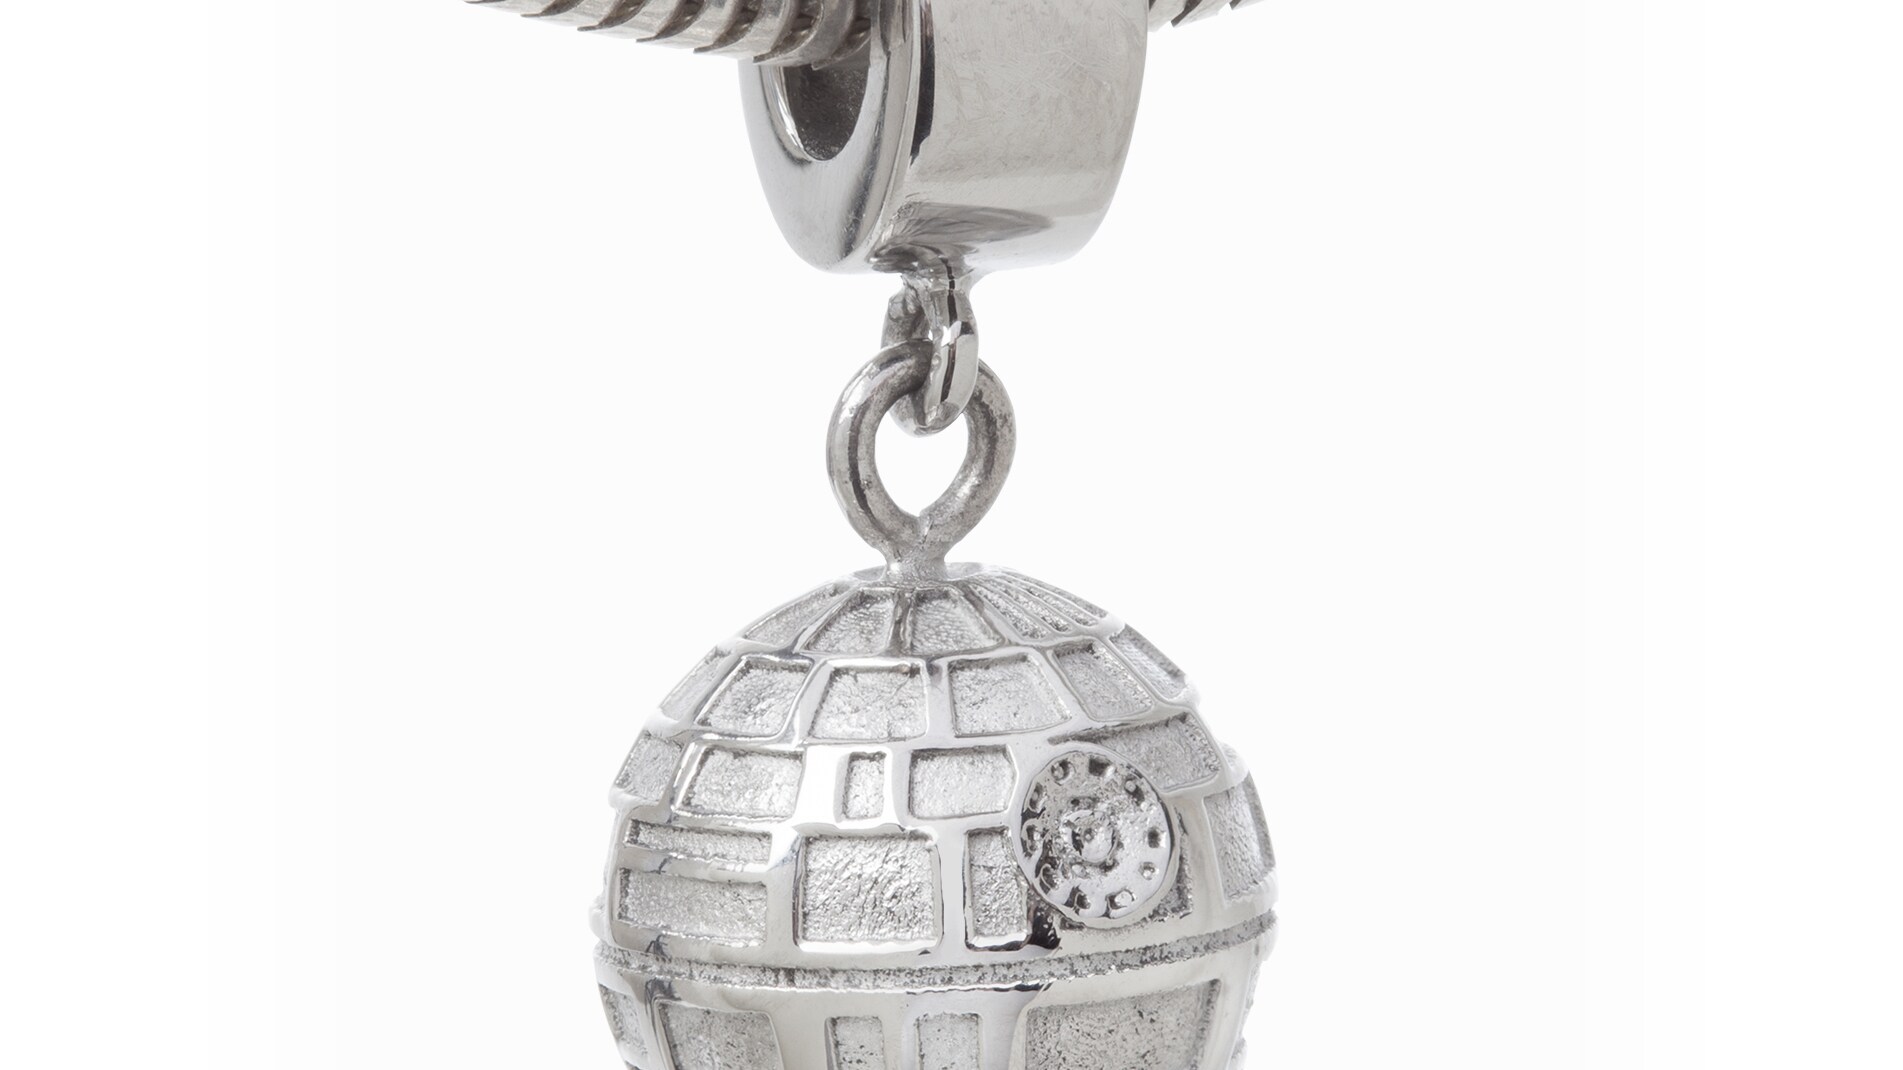 Death Star Charm Bead (compatible with all major charm bracelets)